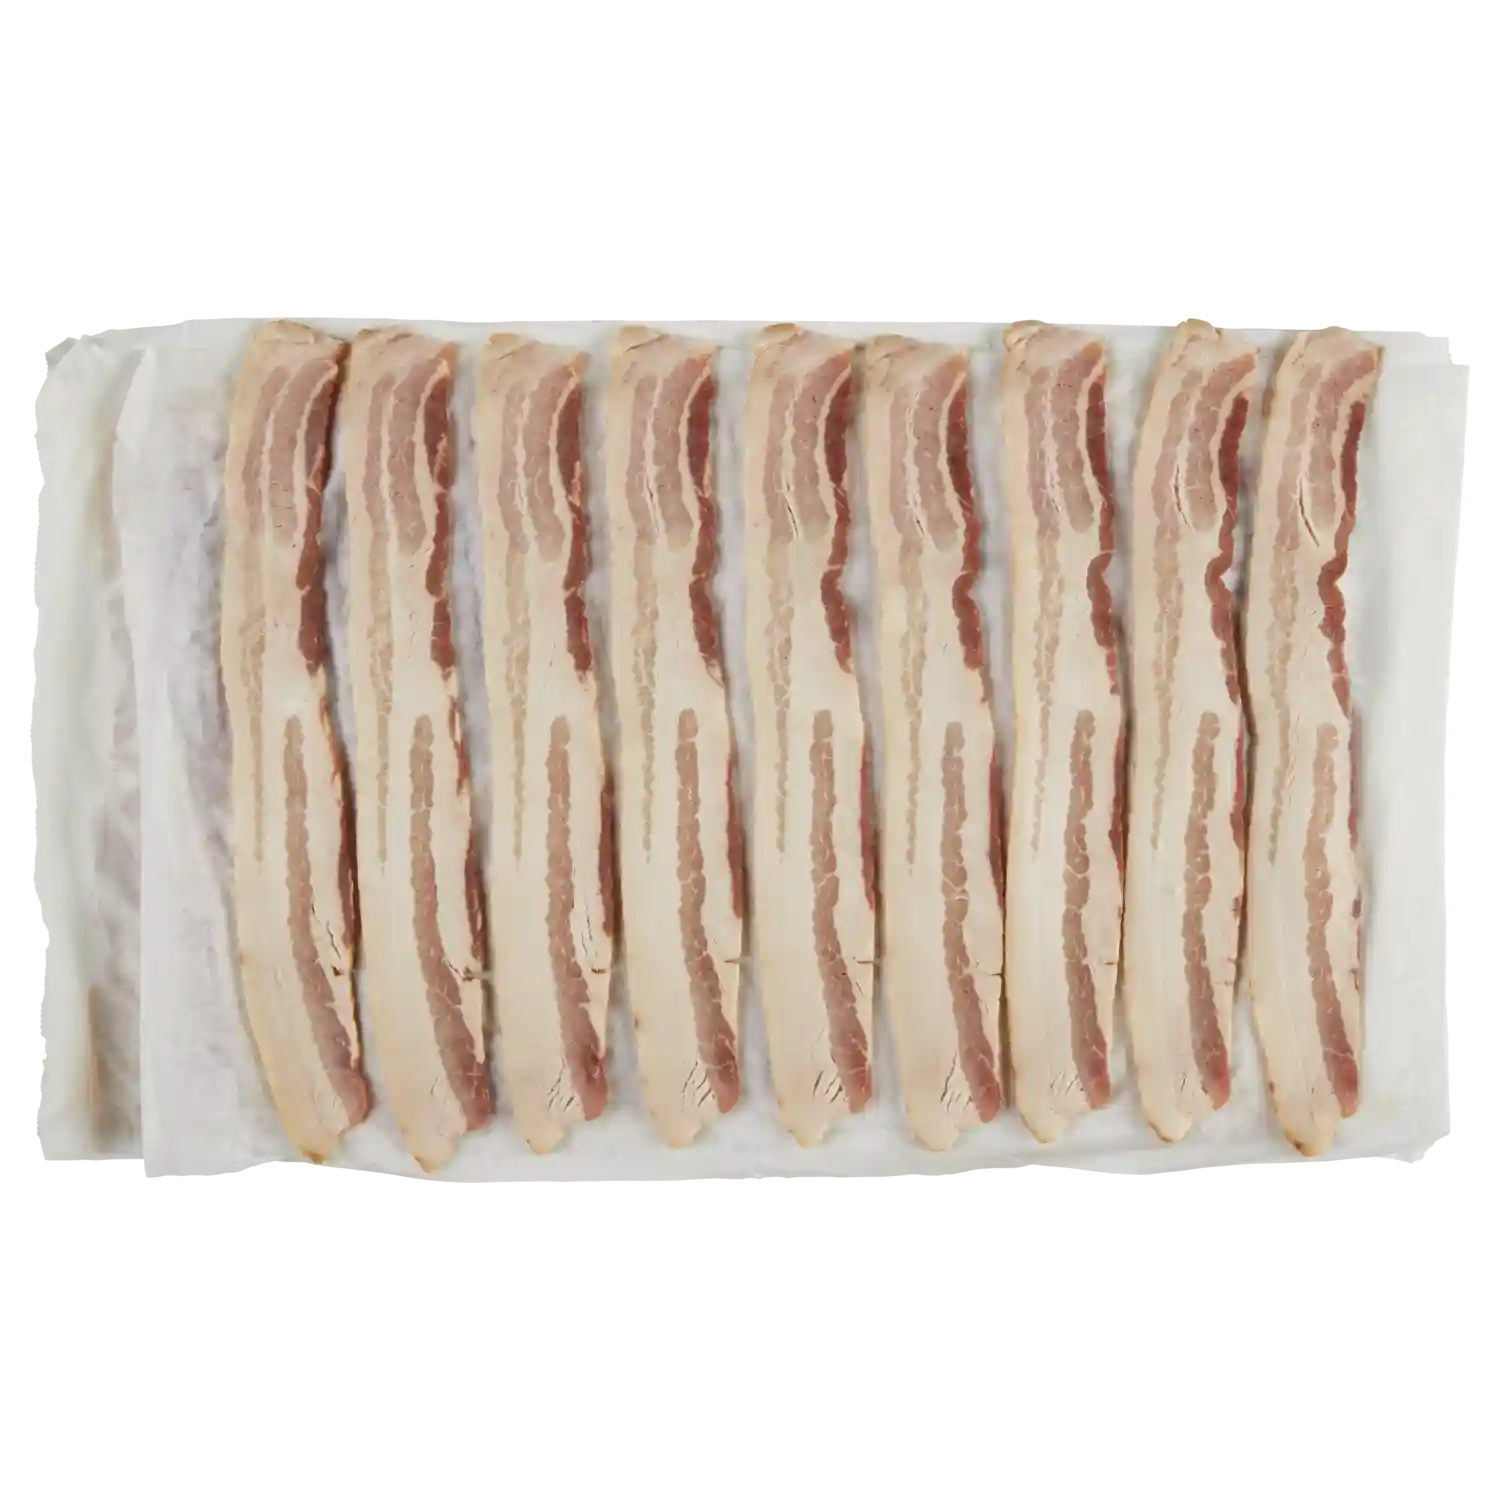 Wright® Brand Naturally Hickory Smoked Extra Thin Sliced Bacon, Flat-Pack®, 15 Lbs, 22-26 Slices per Pound, Frozen_image_31